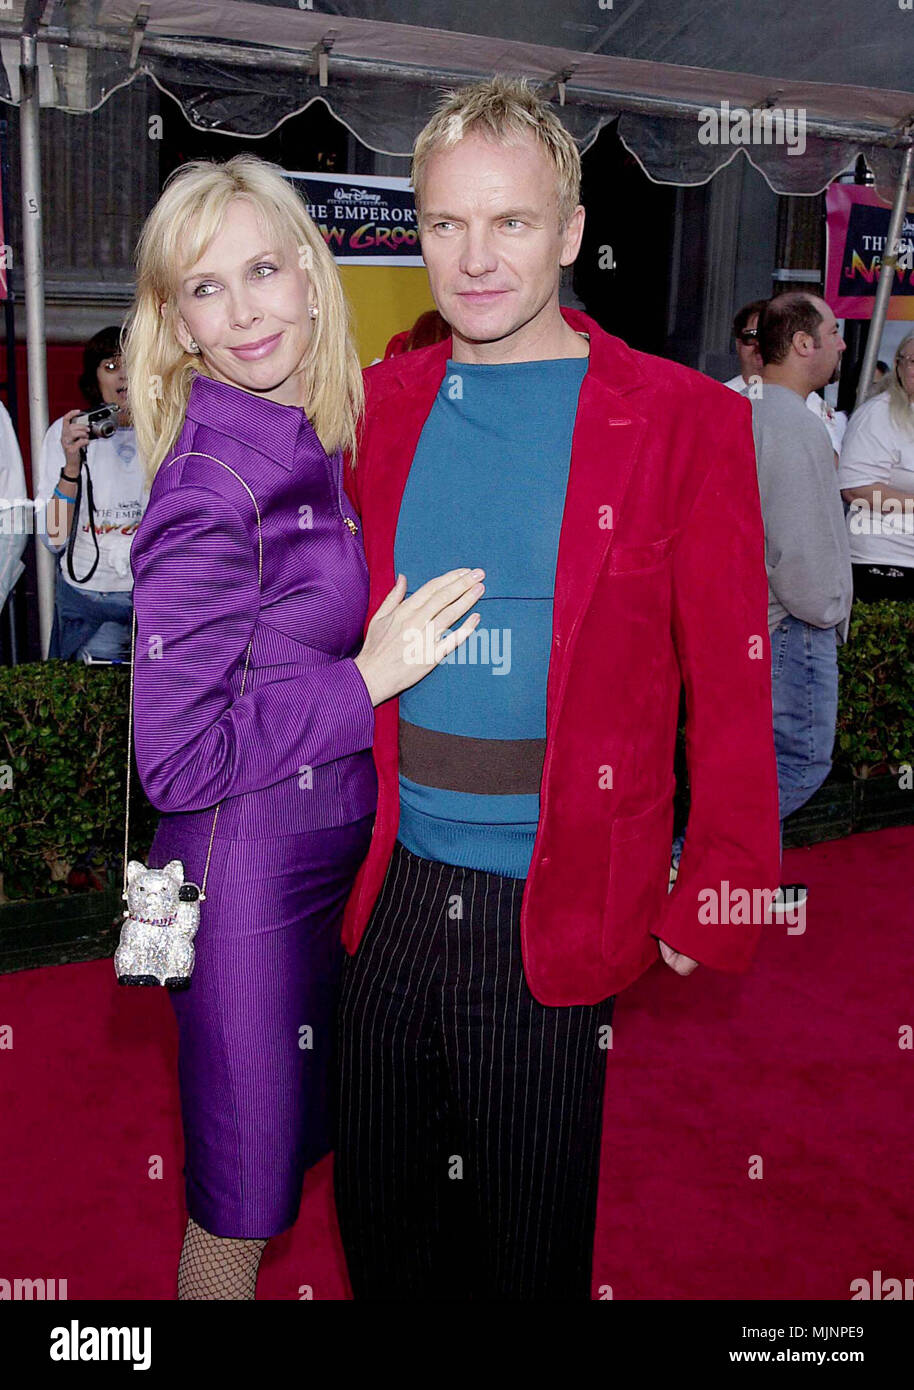 10 Dec 2000, Los Angeles, California, USA --- Sting and wife Trudie Styler at the premiere of 'The Emperor's New Groove.' 12/10/00-Los Angeles, CA --- ' Tsuni / Bourquard 'Sting and wife Trudie Styler Sting and wife Trudie Styler Sting and wife Trudie Styler Event in Hollywood Life - California,  Red Carpet Event, Vertical, USA, Film Industry, Celebrities,  Photography, Bestof, Arts Culture and Entertainment, Topix  Celebrities fashion /  from the Red Carpet-1994-2000, one person, Vertical, Best of, Hollywood Life, Event in Hollywood Life - California,  Red Carpet and backstage, USA, Film Indu Stock Photo